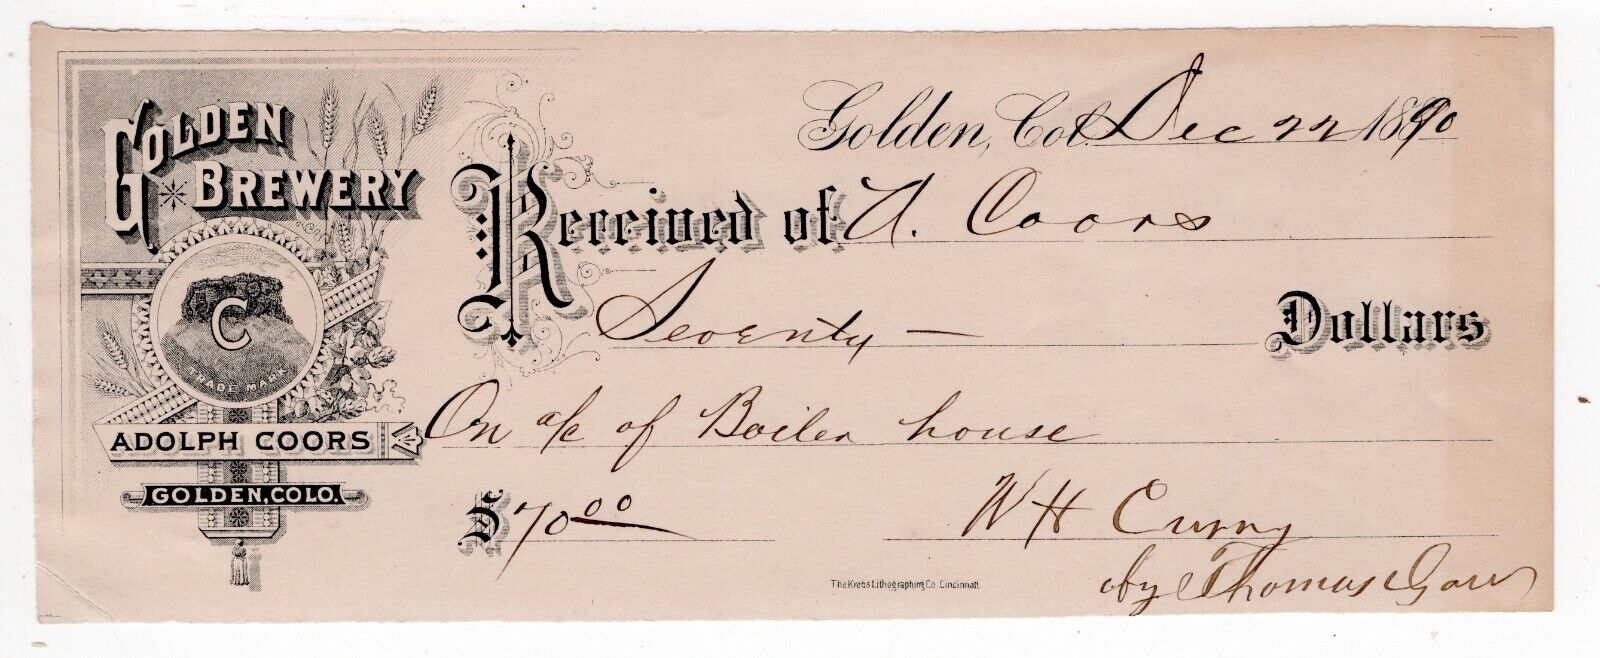 1890 Golden Brewery Company Check to Adolph Coors Founder SCRACE